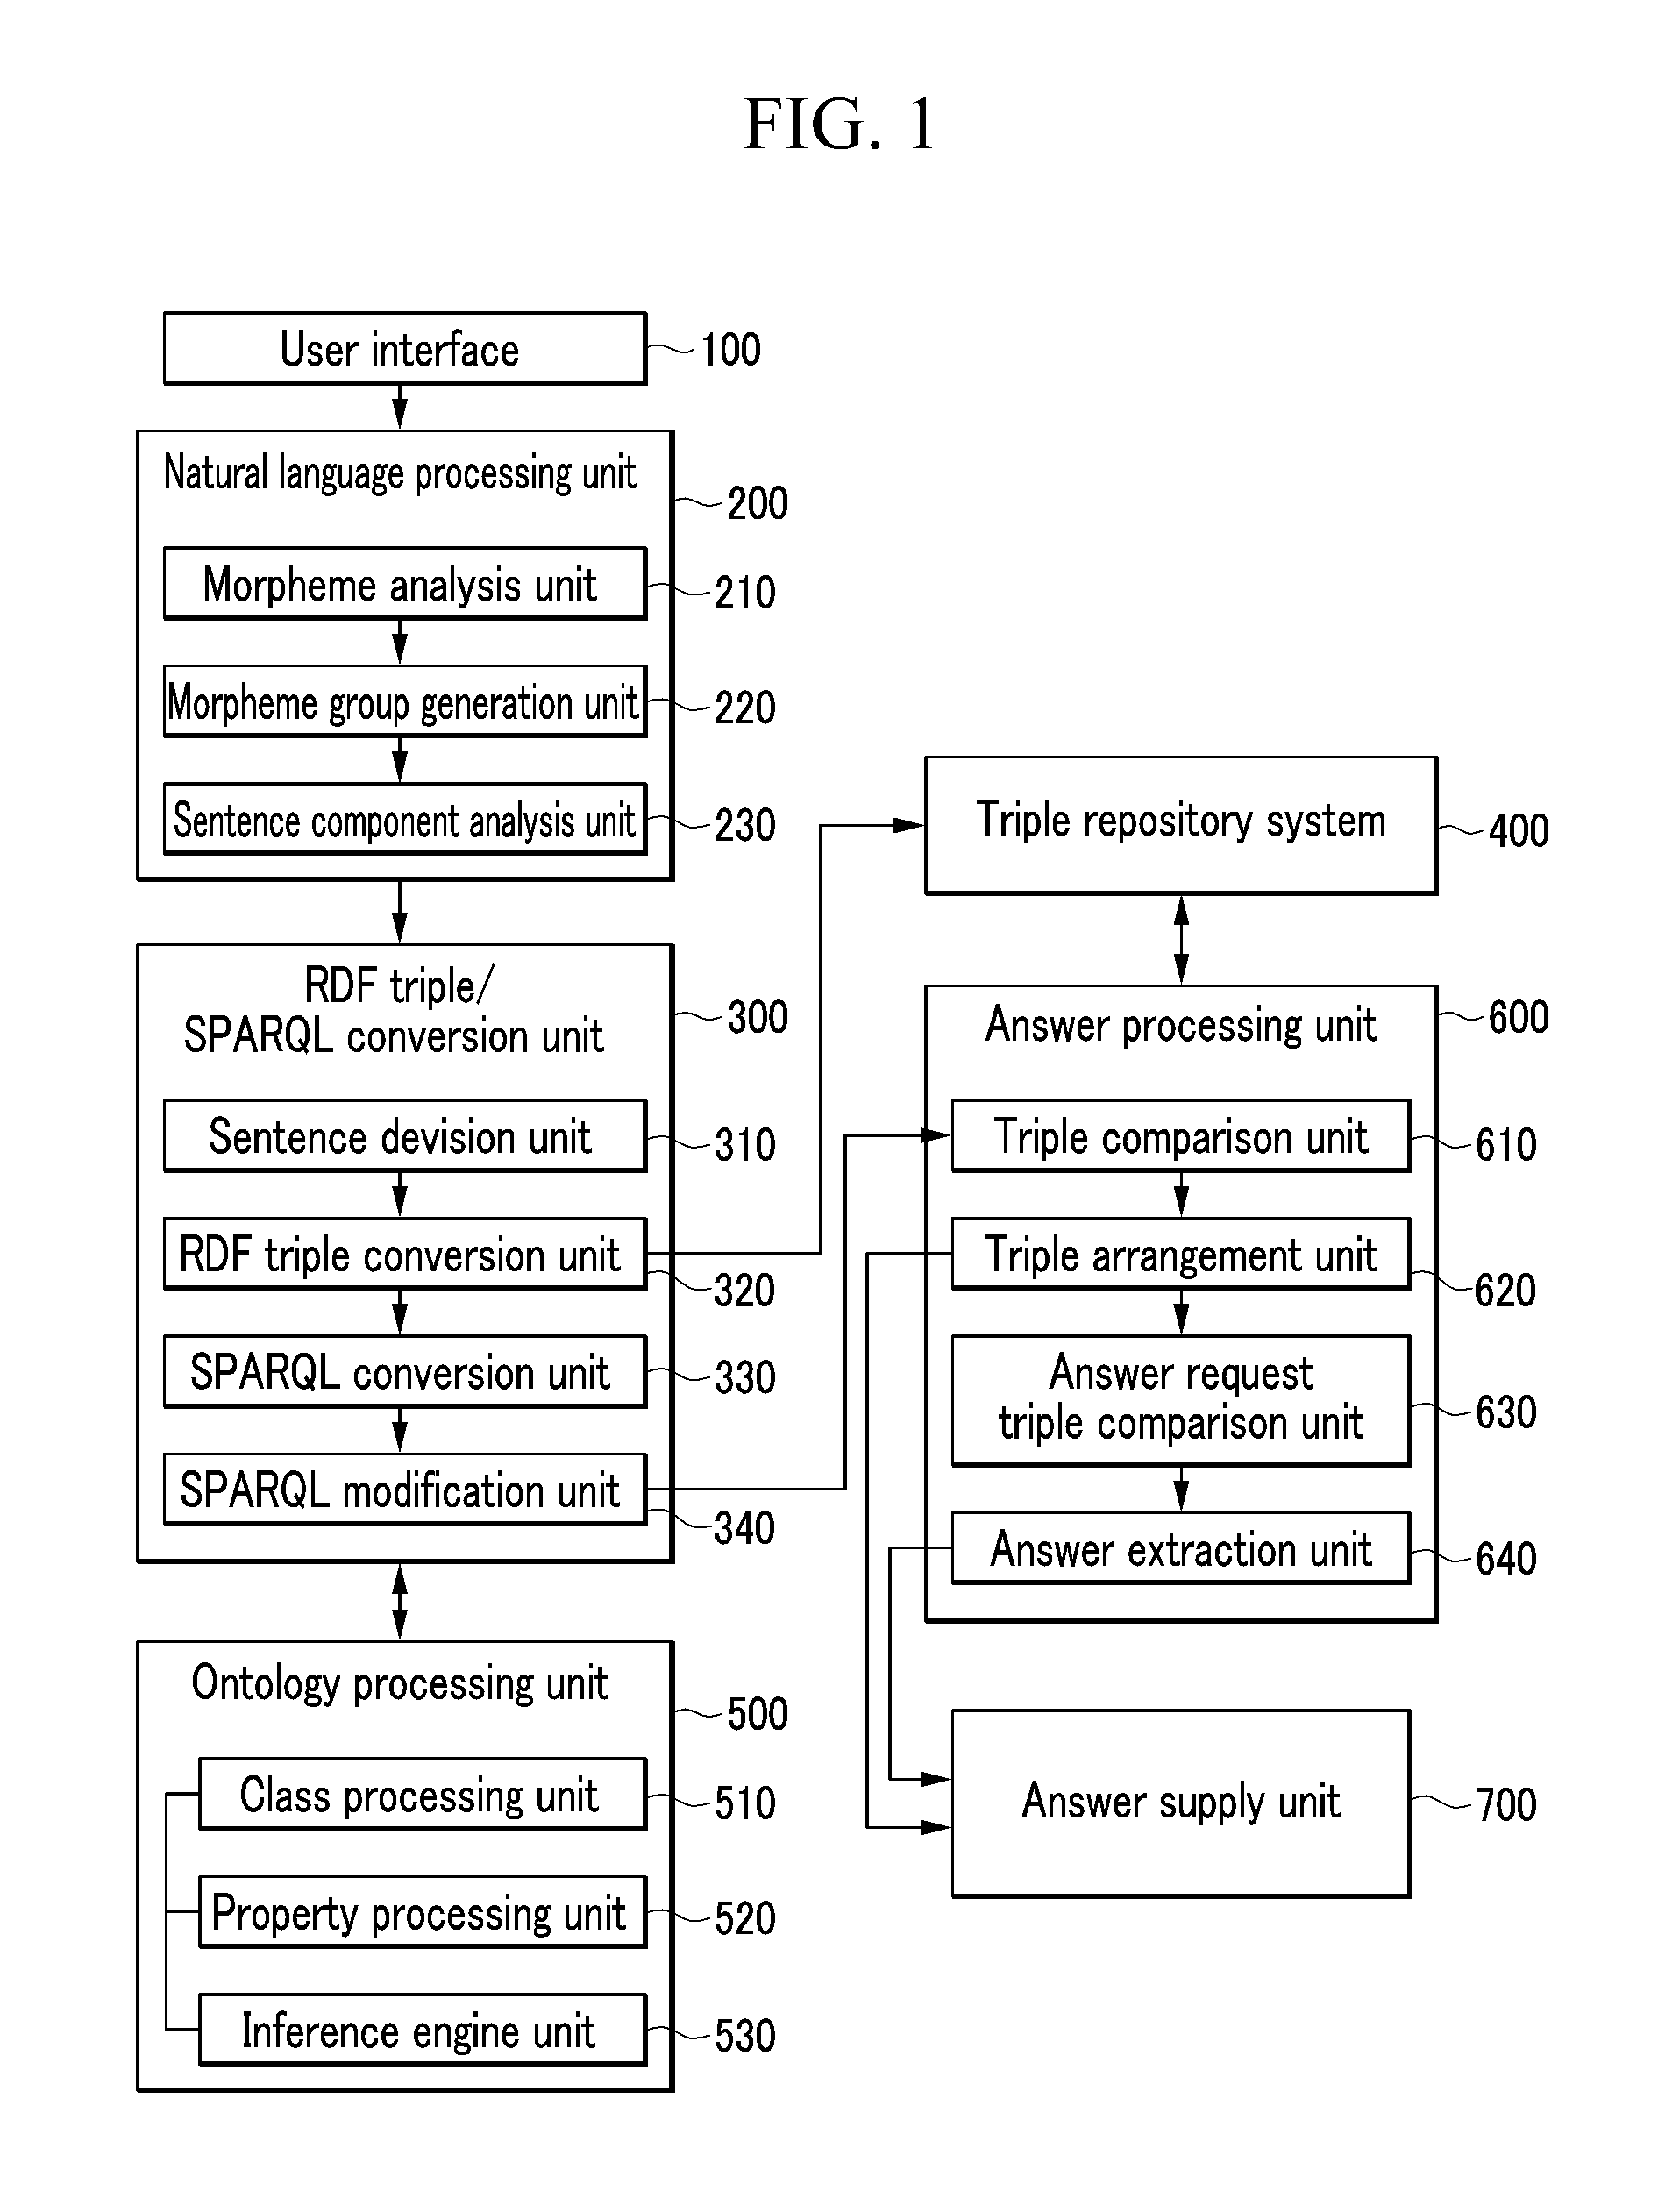 System and method for searching and question-answering